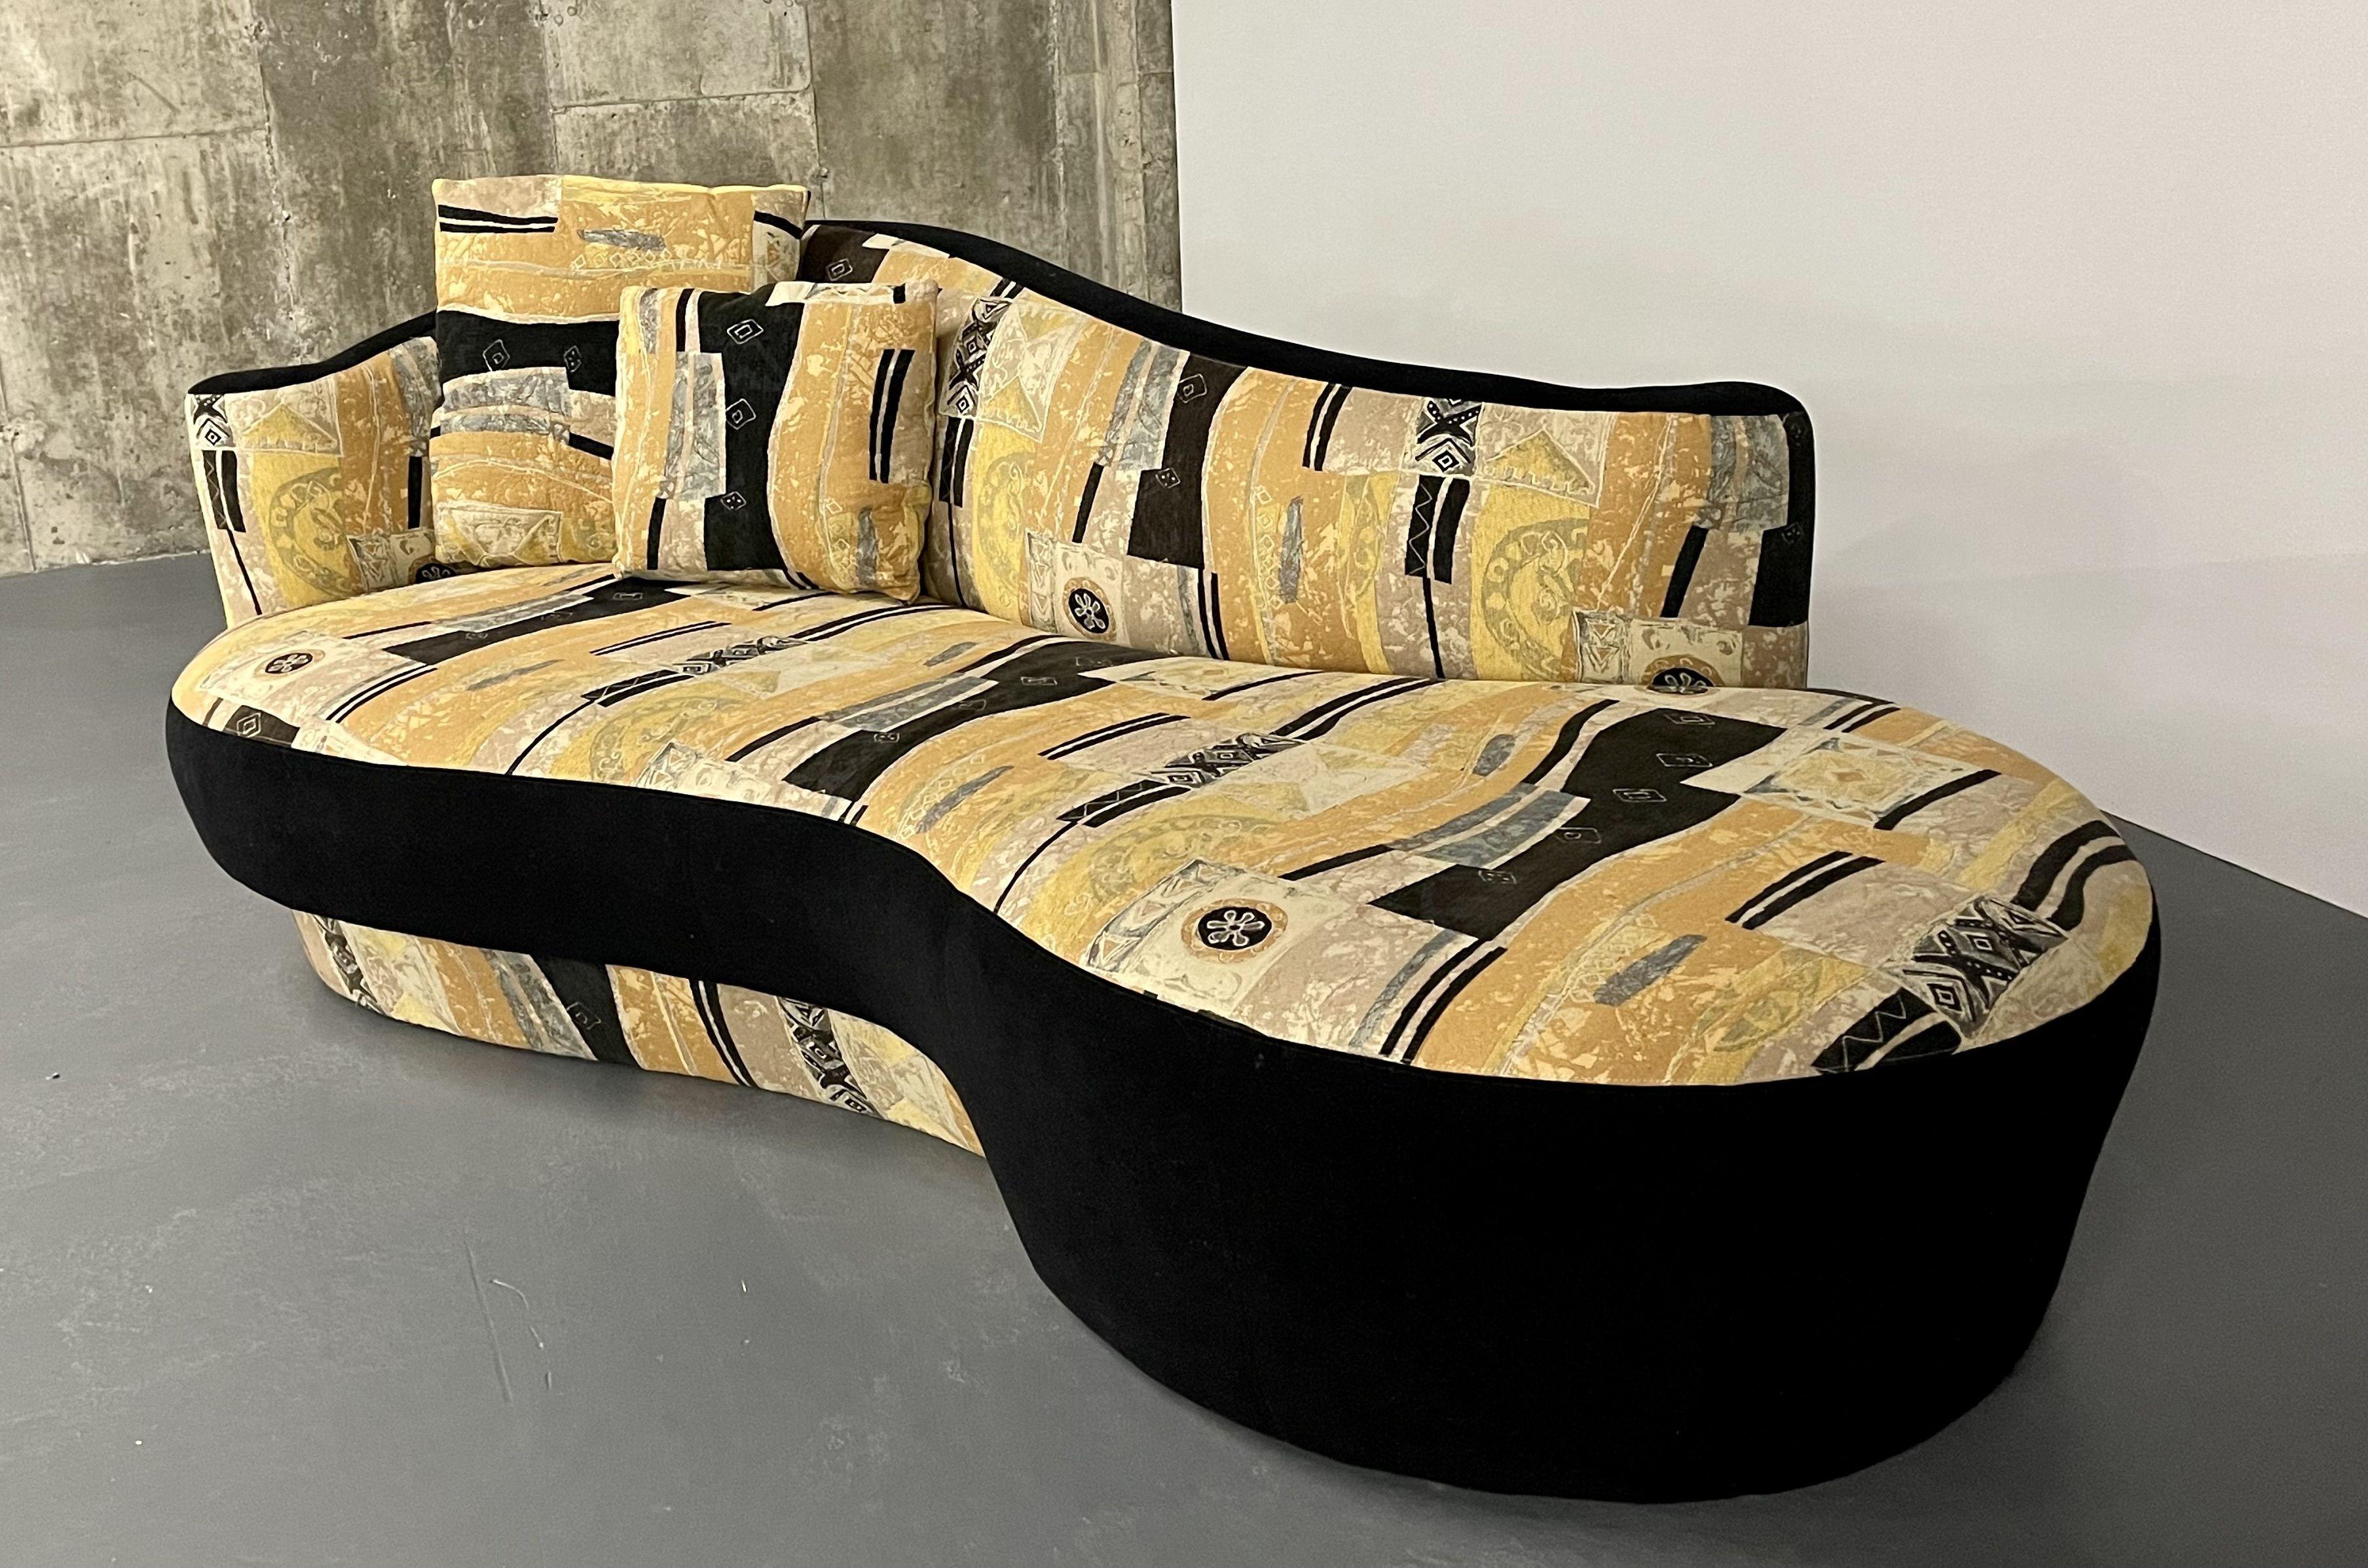 Mid-century Weiman for Preview Cloud Sofa, Nautilus, Kidney-Shape, American, 1970s.

Organic form sofa in the style of Vladimir Kagan, by Weiman for Preview, Labeled, in original 'Groovy Baby Groovy' fabric. The curved upper sits flat on the